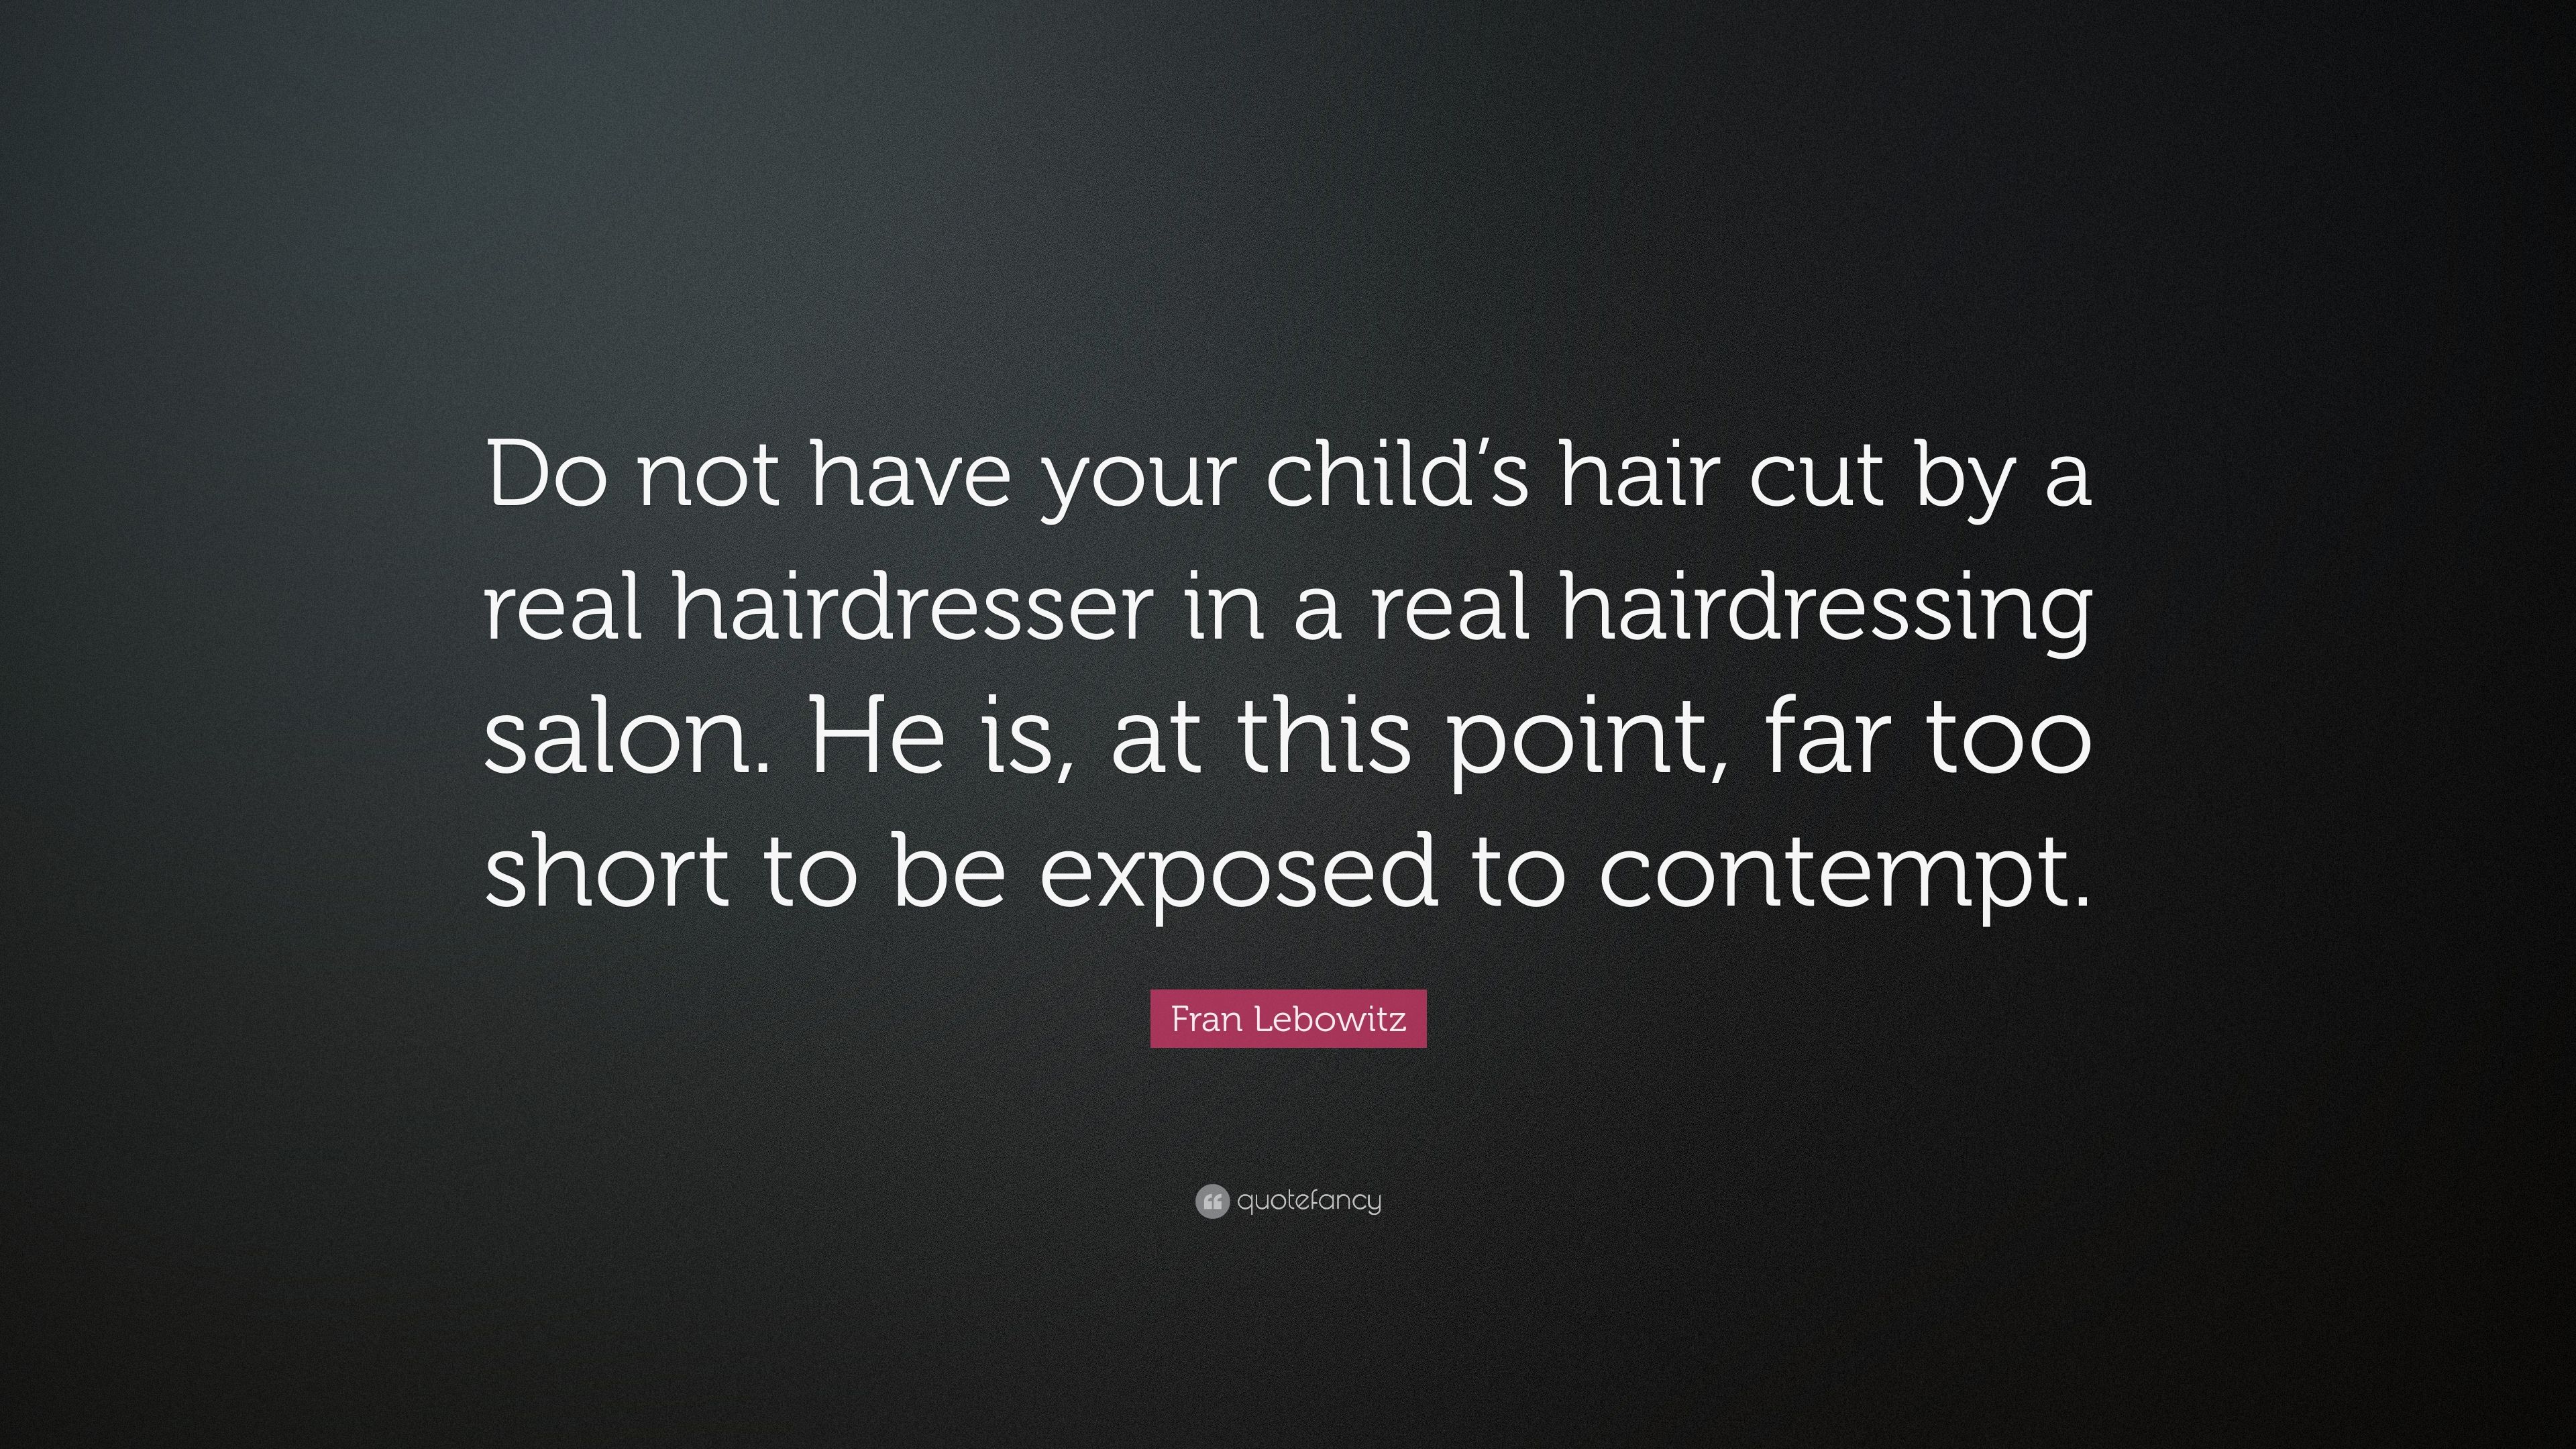 Fran Lebowitz Quote: “Do not have your child's hair cut